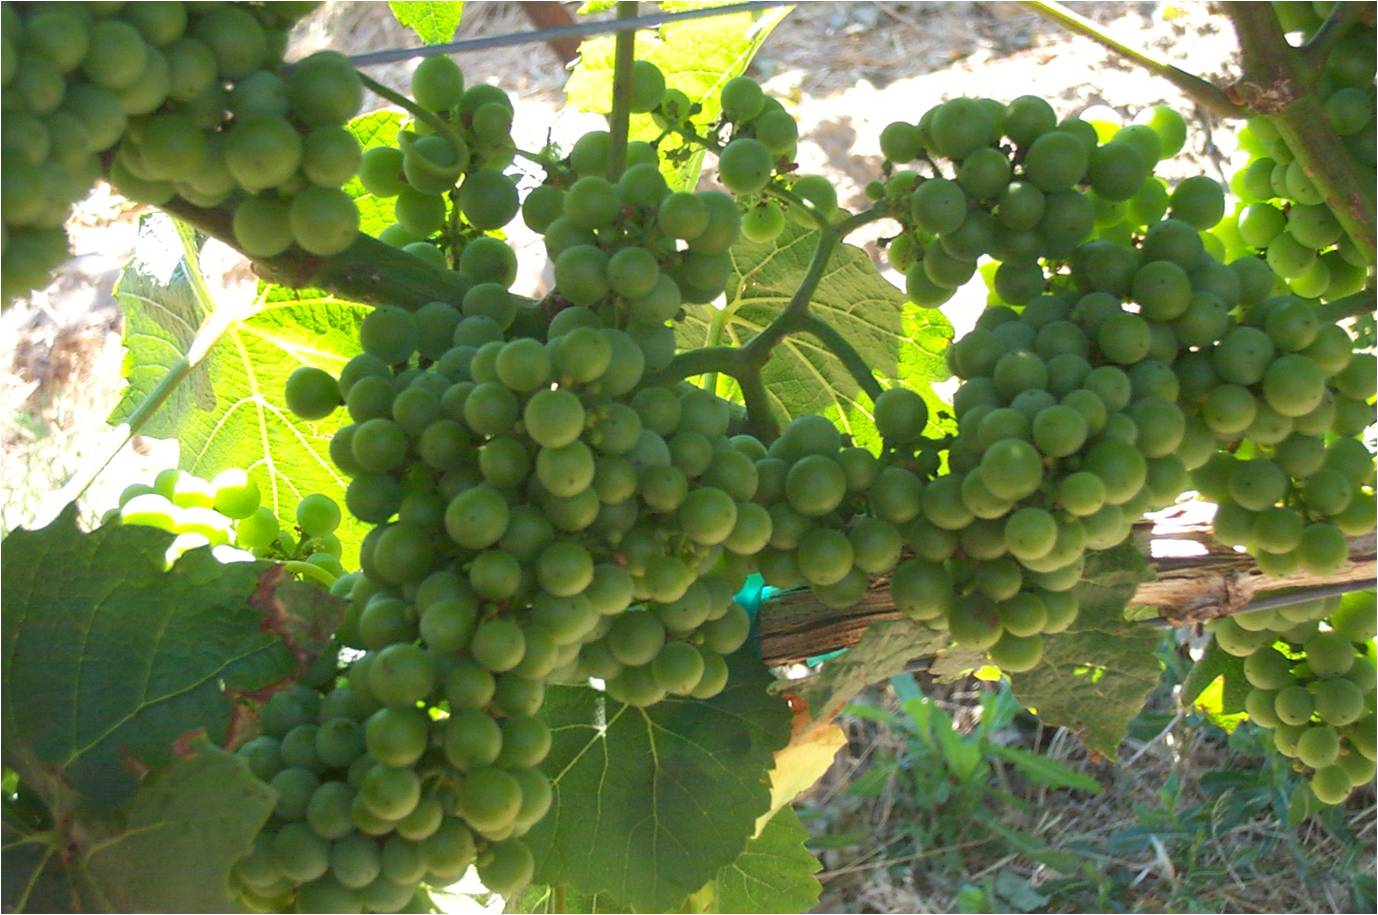 Larger Grape Clusters